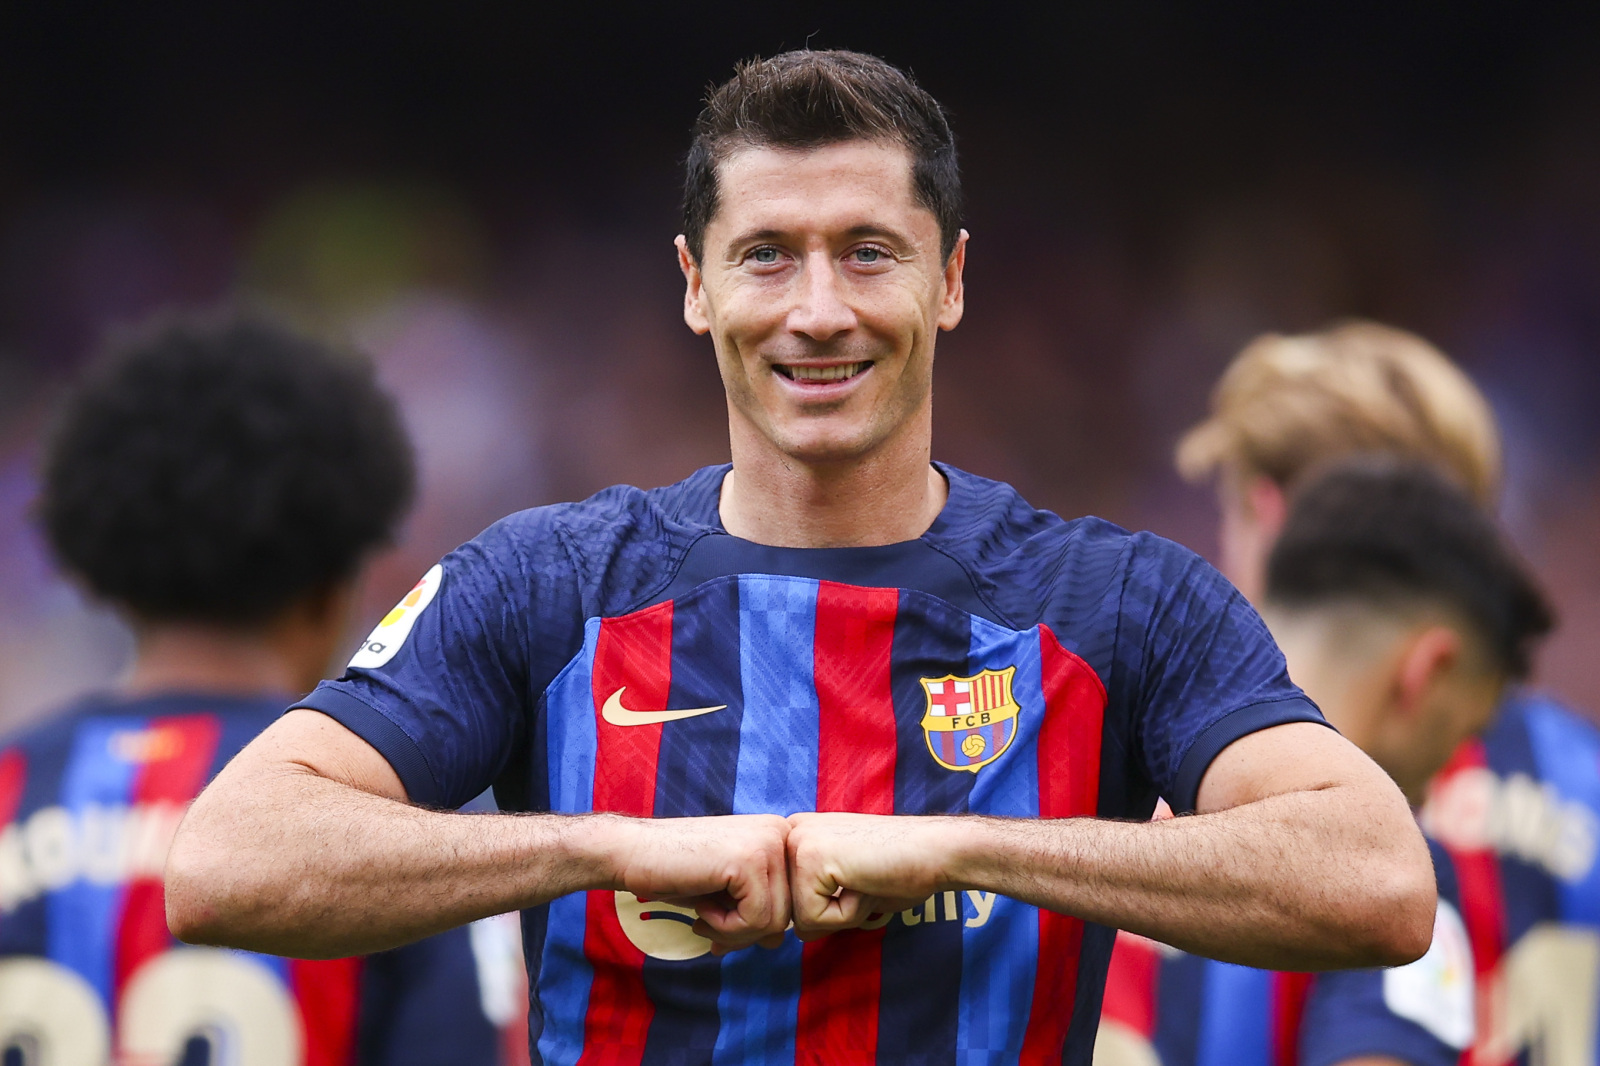 Robert Lewandowski comments on past links with Real Madrid